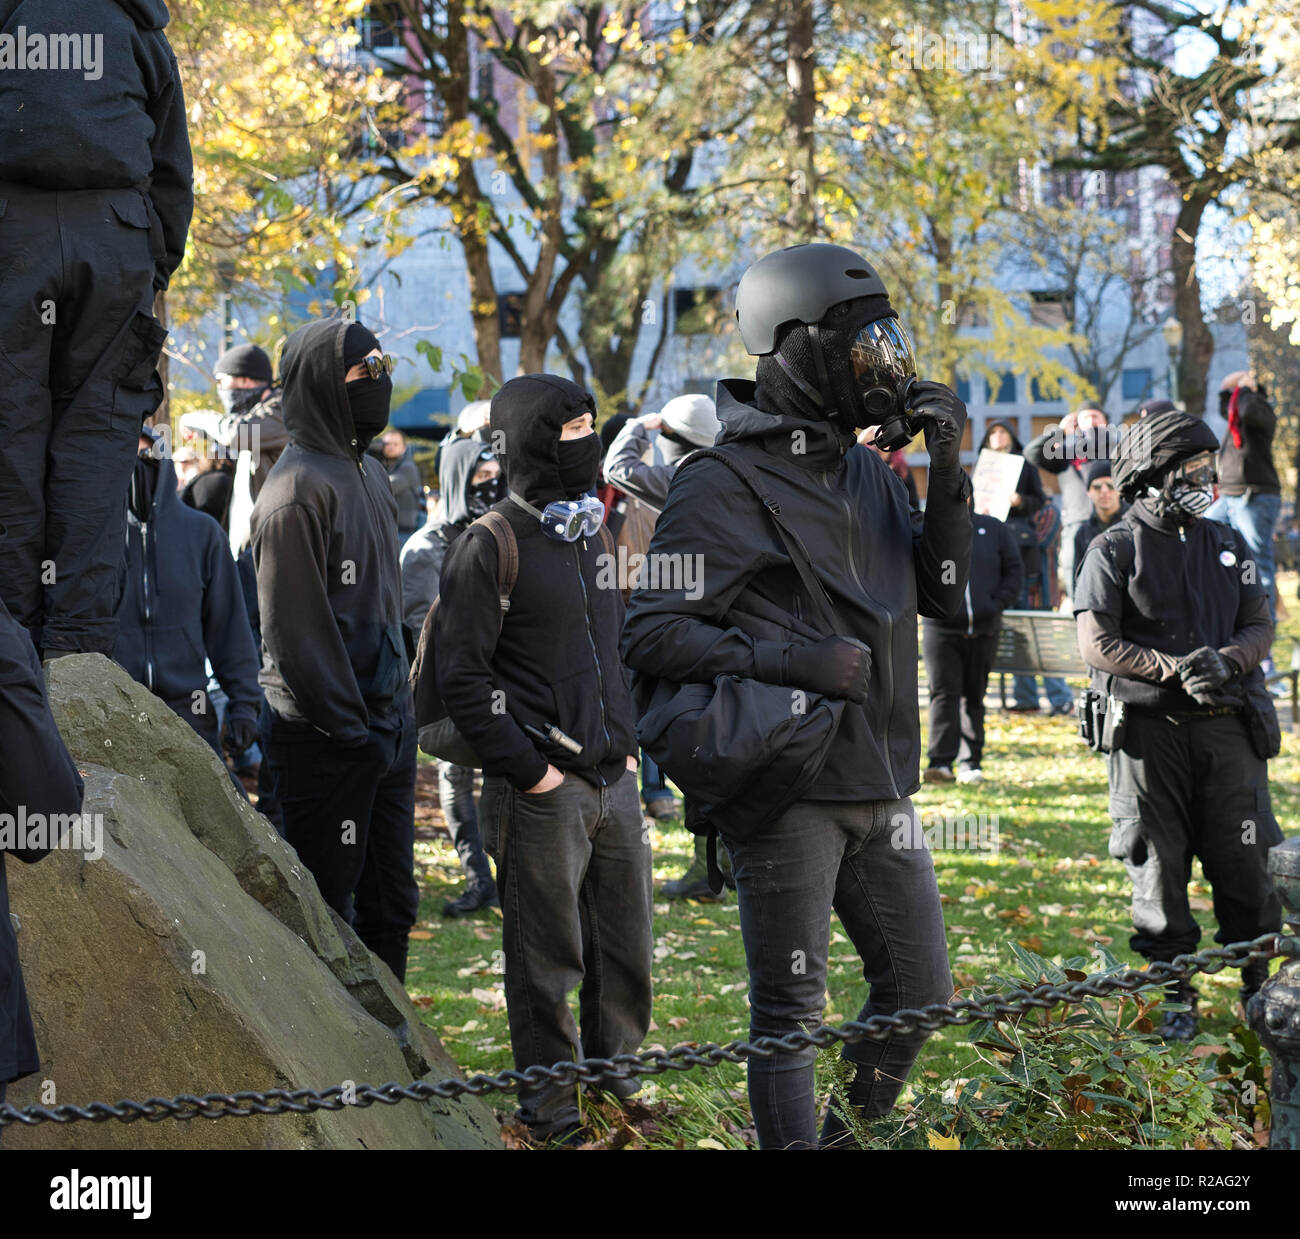 Dressed in all black and helmuts, these Rose City Antifa members stand ready. Stock Photo